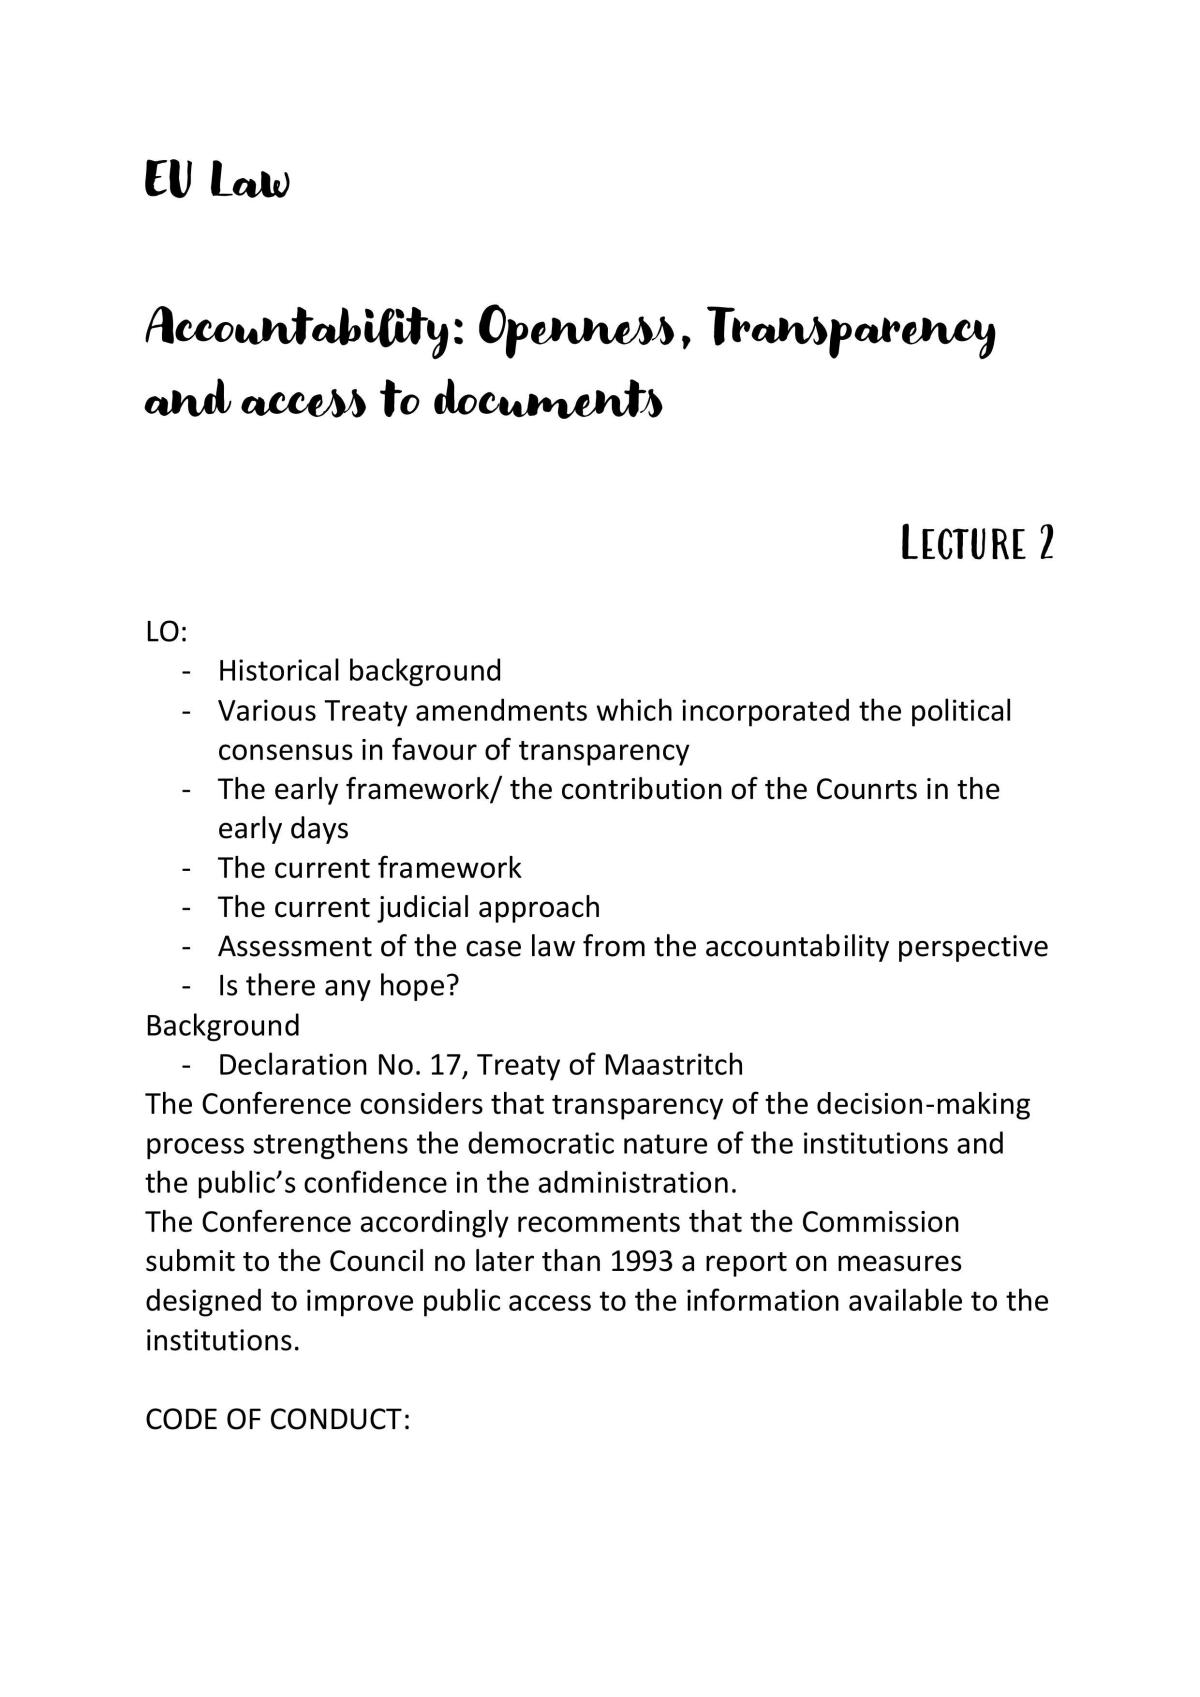 Accountability: Openness, Transparency, and access to documents. - Page 1